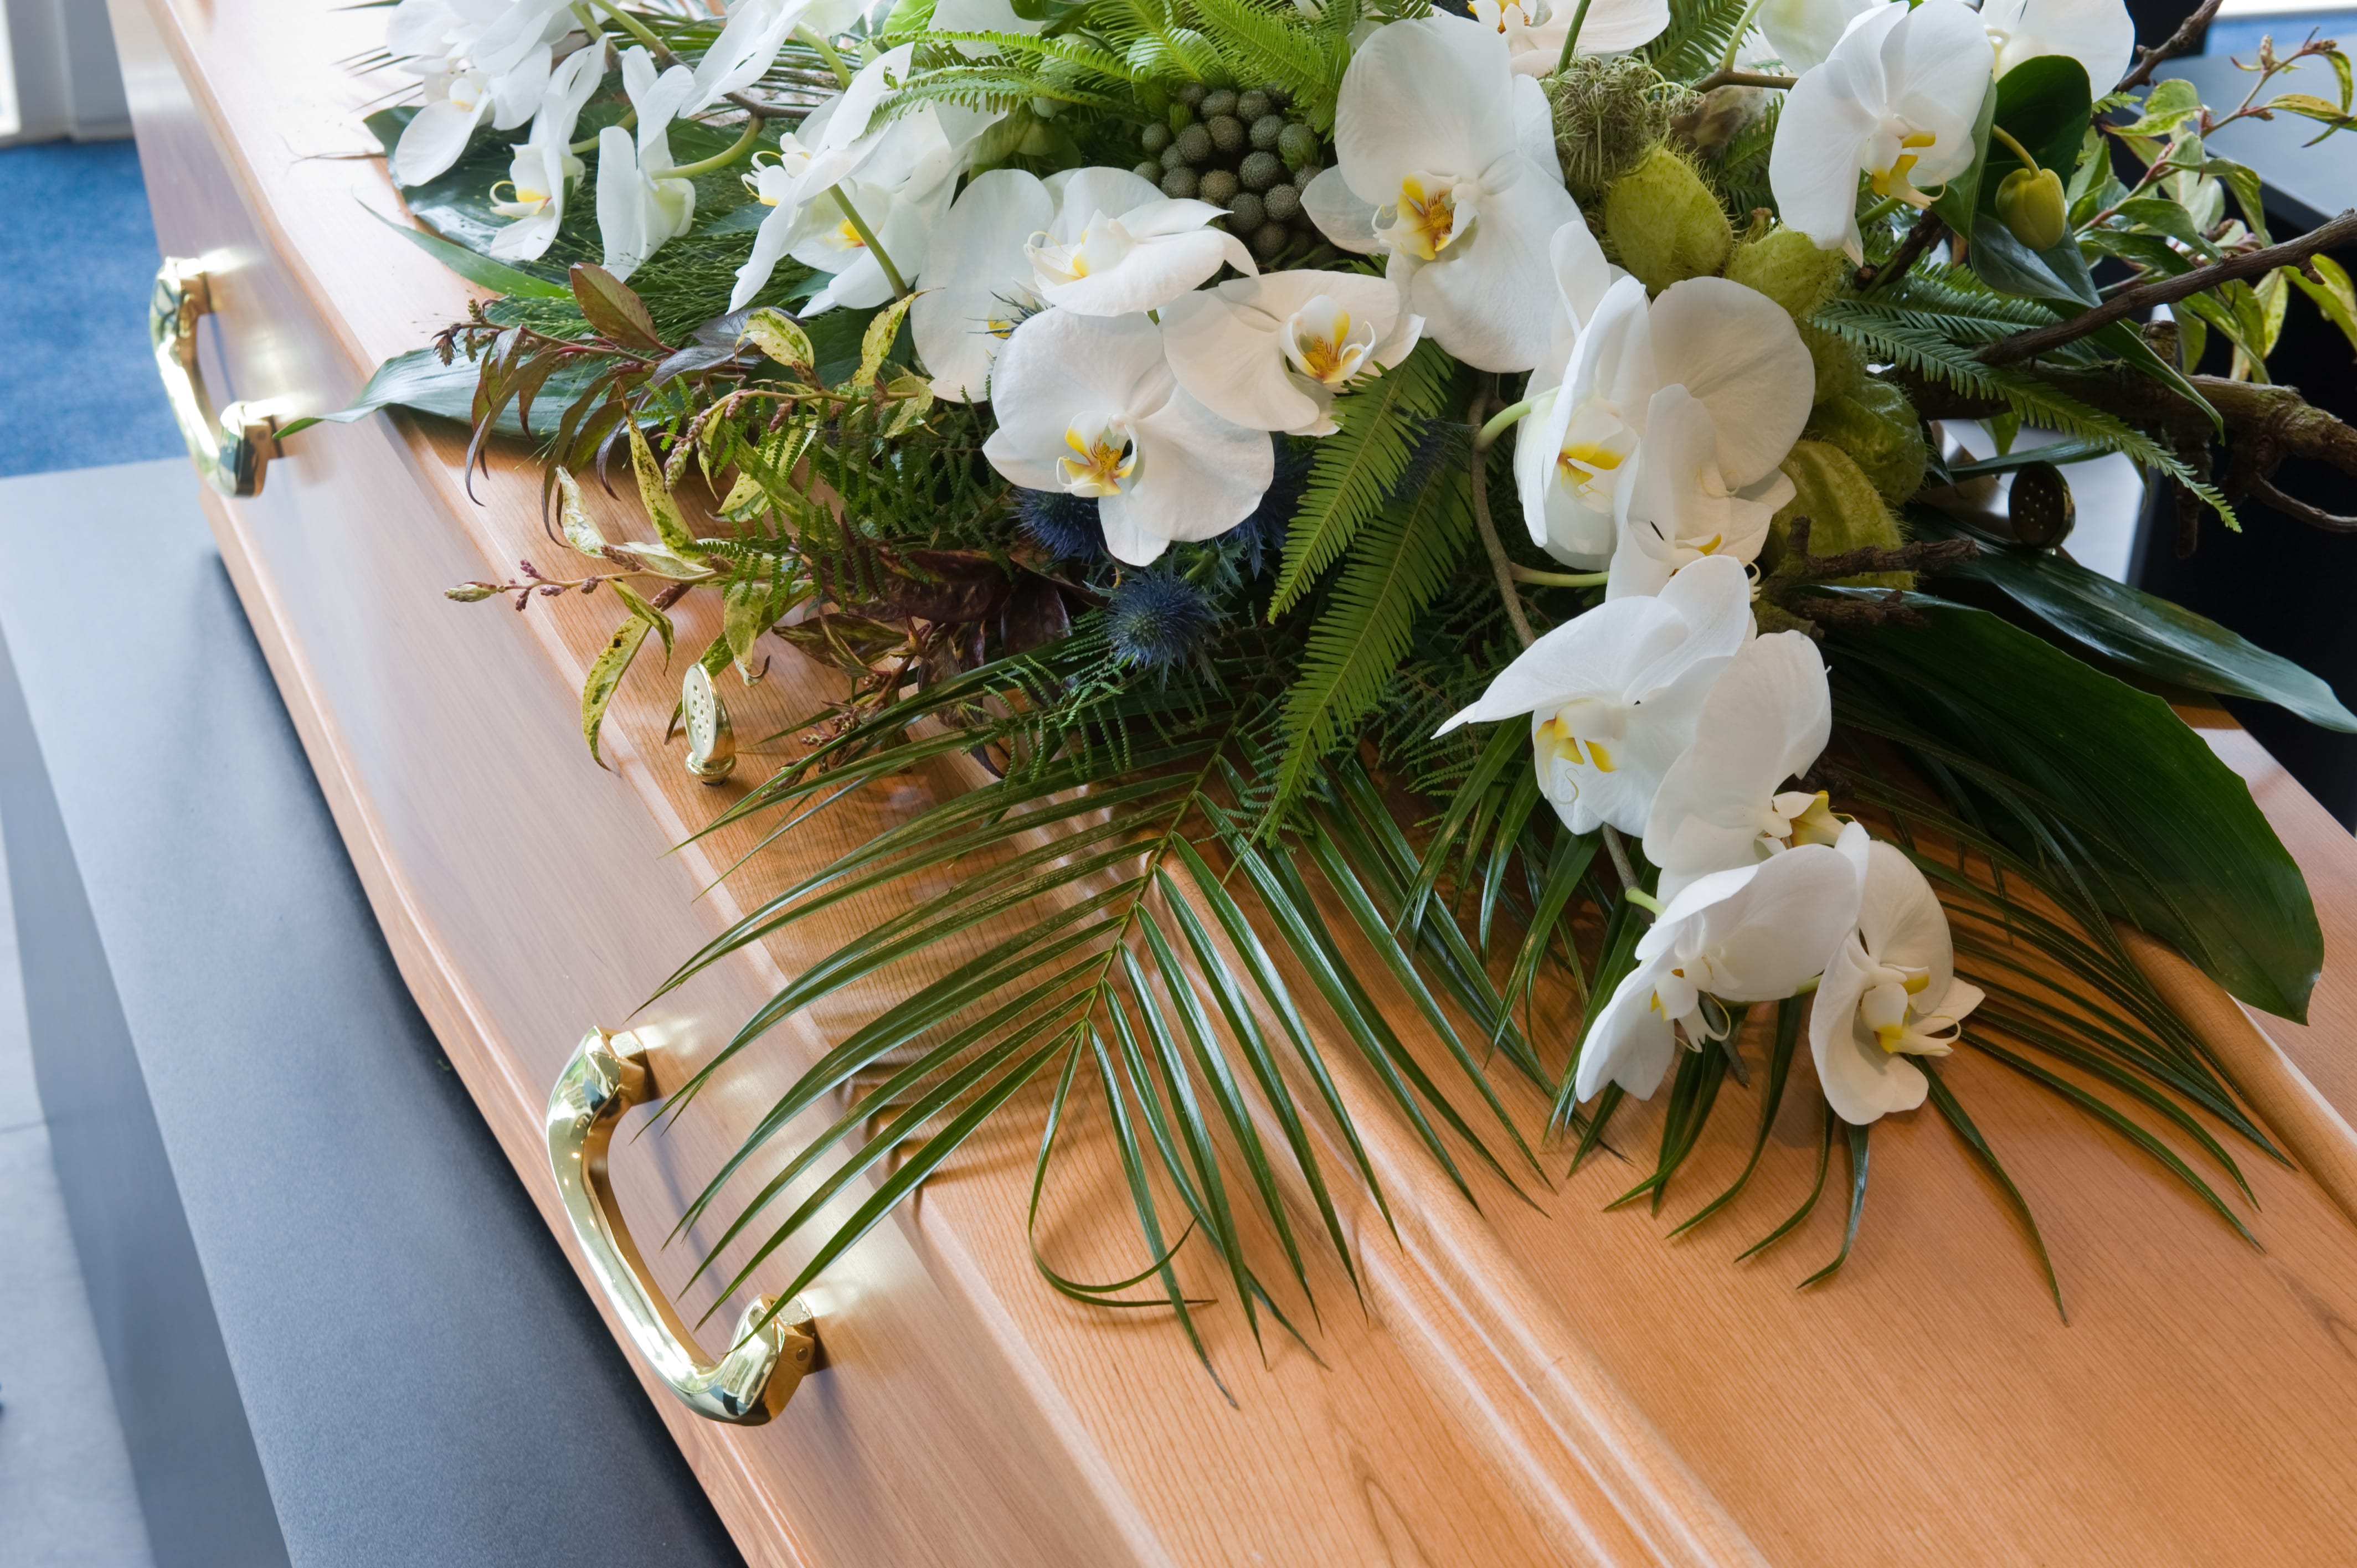 What to do when a person forgets their loved one has died